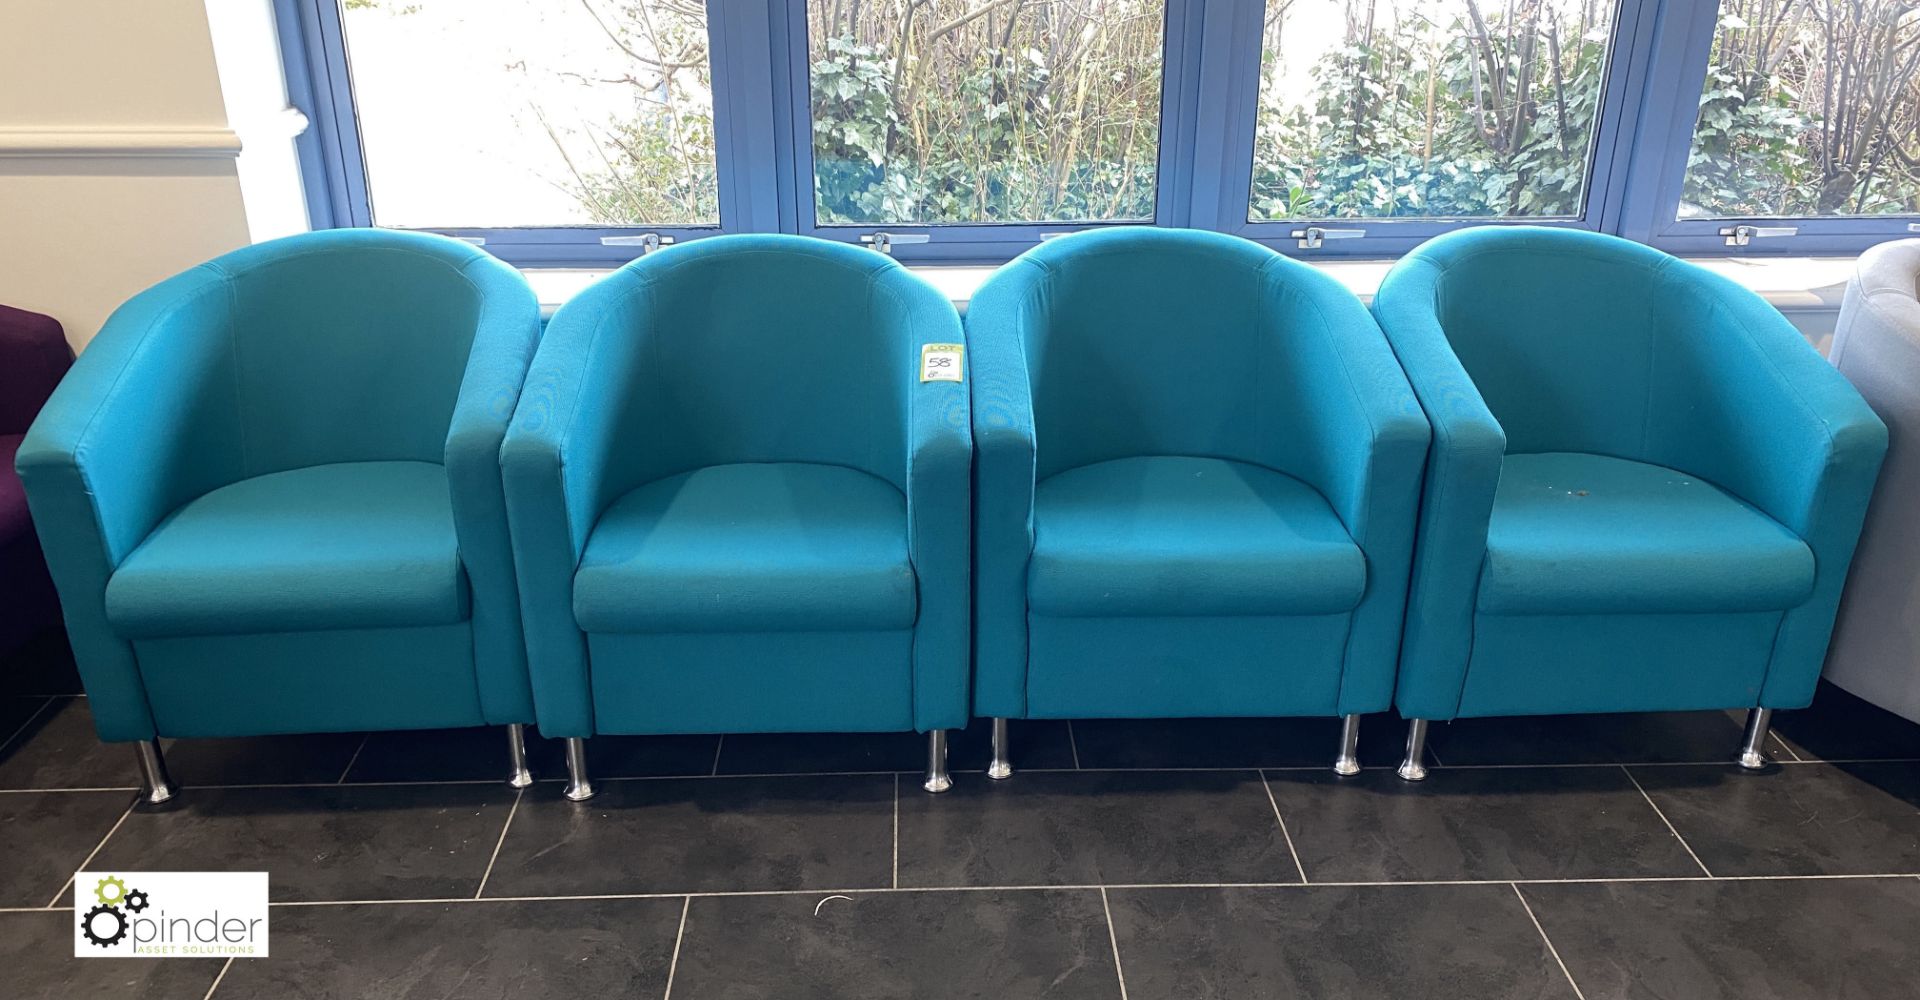 4 upholstered Tub Chairs, turquoise (located in Restaurant)